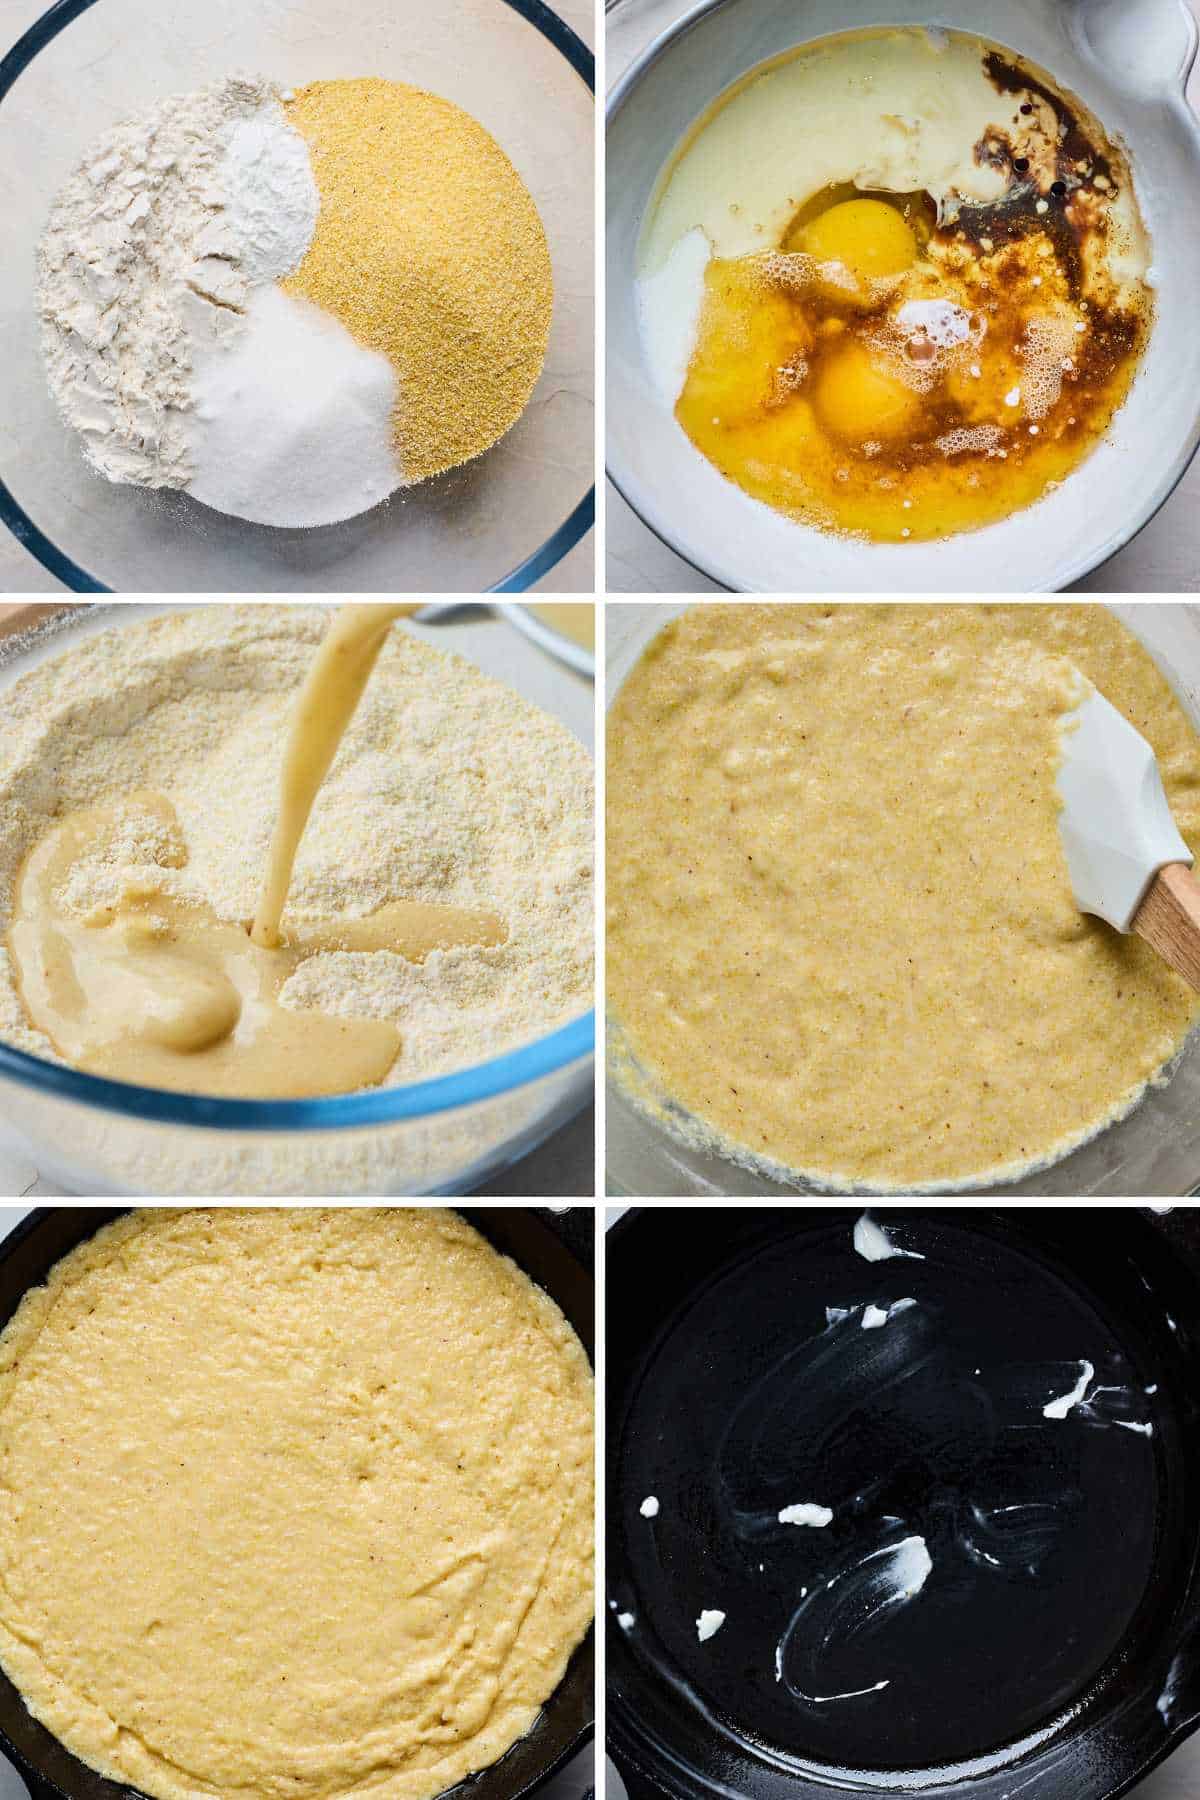 A collage of images showing the steps in mixing honey cornbread from the wet ingredients, the dry ingredients, and then mixed together and added to a skillet to bake.